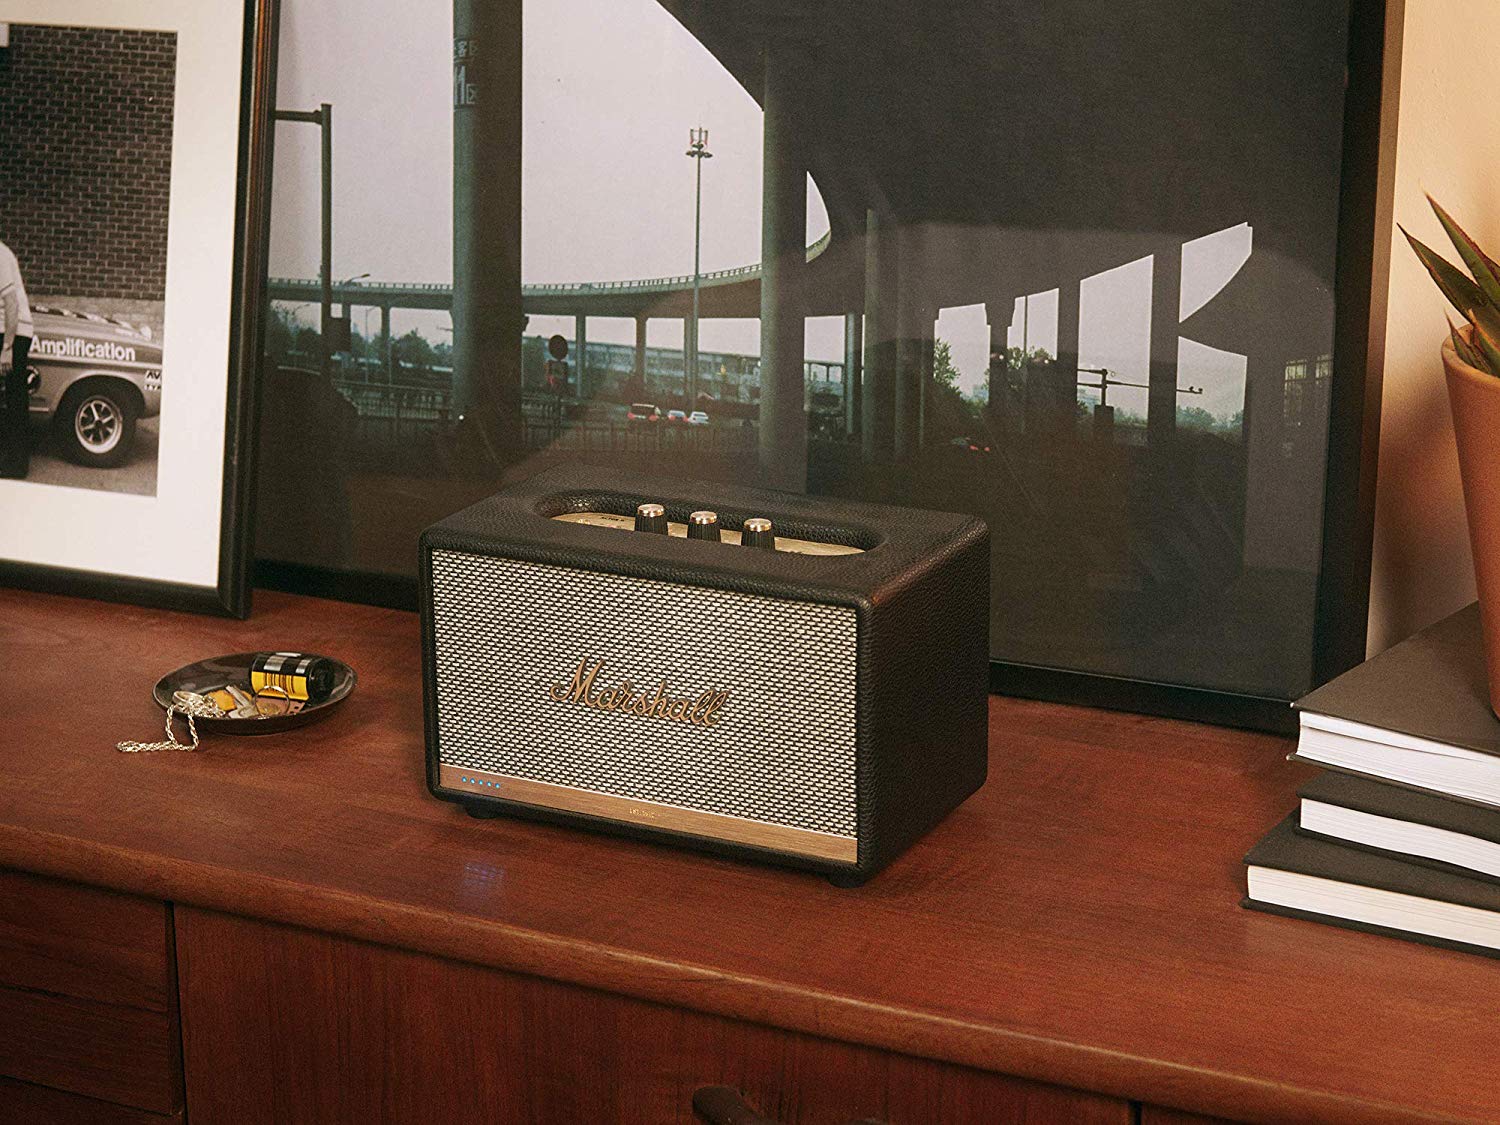 Should you buy the Marshall Acton speaker?